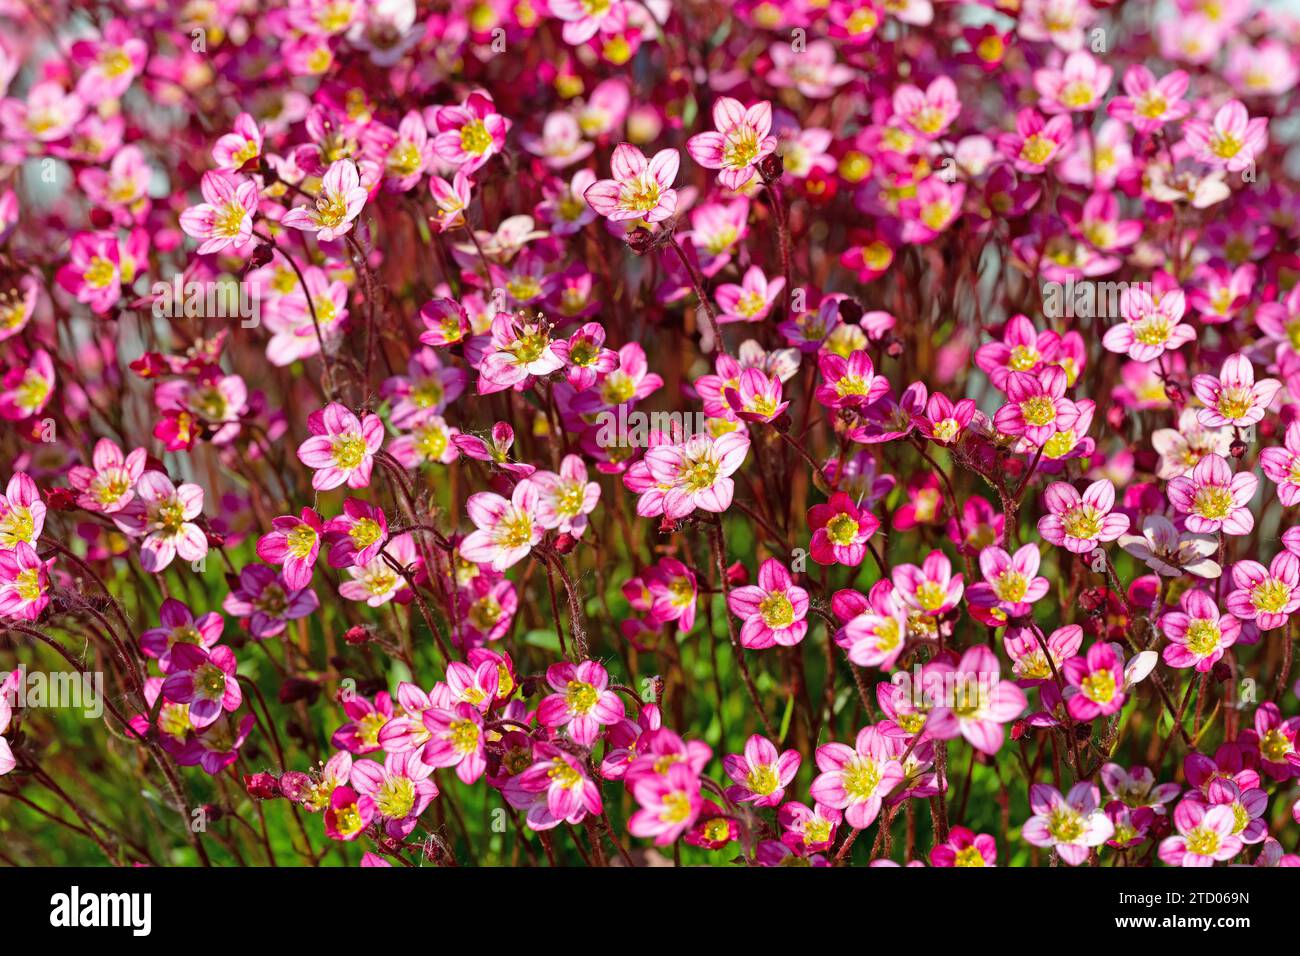 Flowering Mossy Saxifrage in close-up Stock Photo